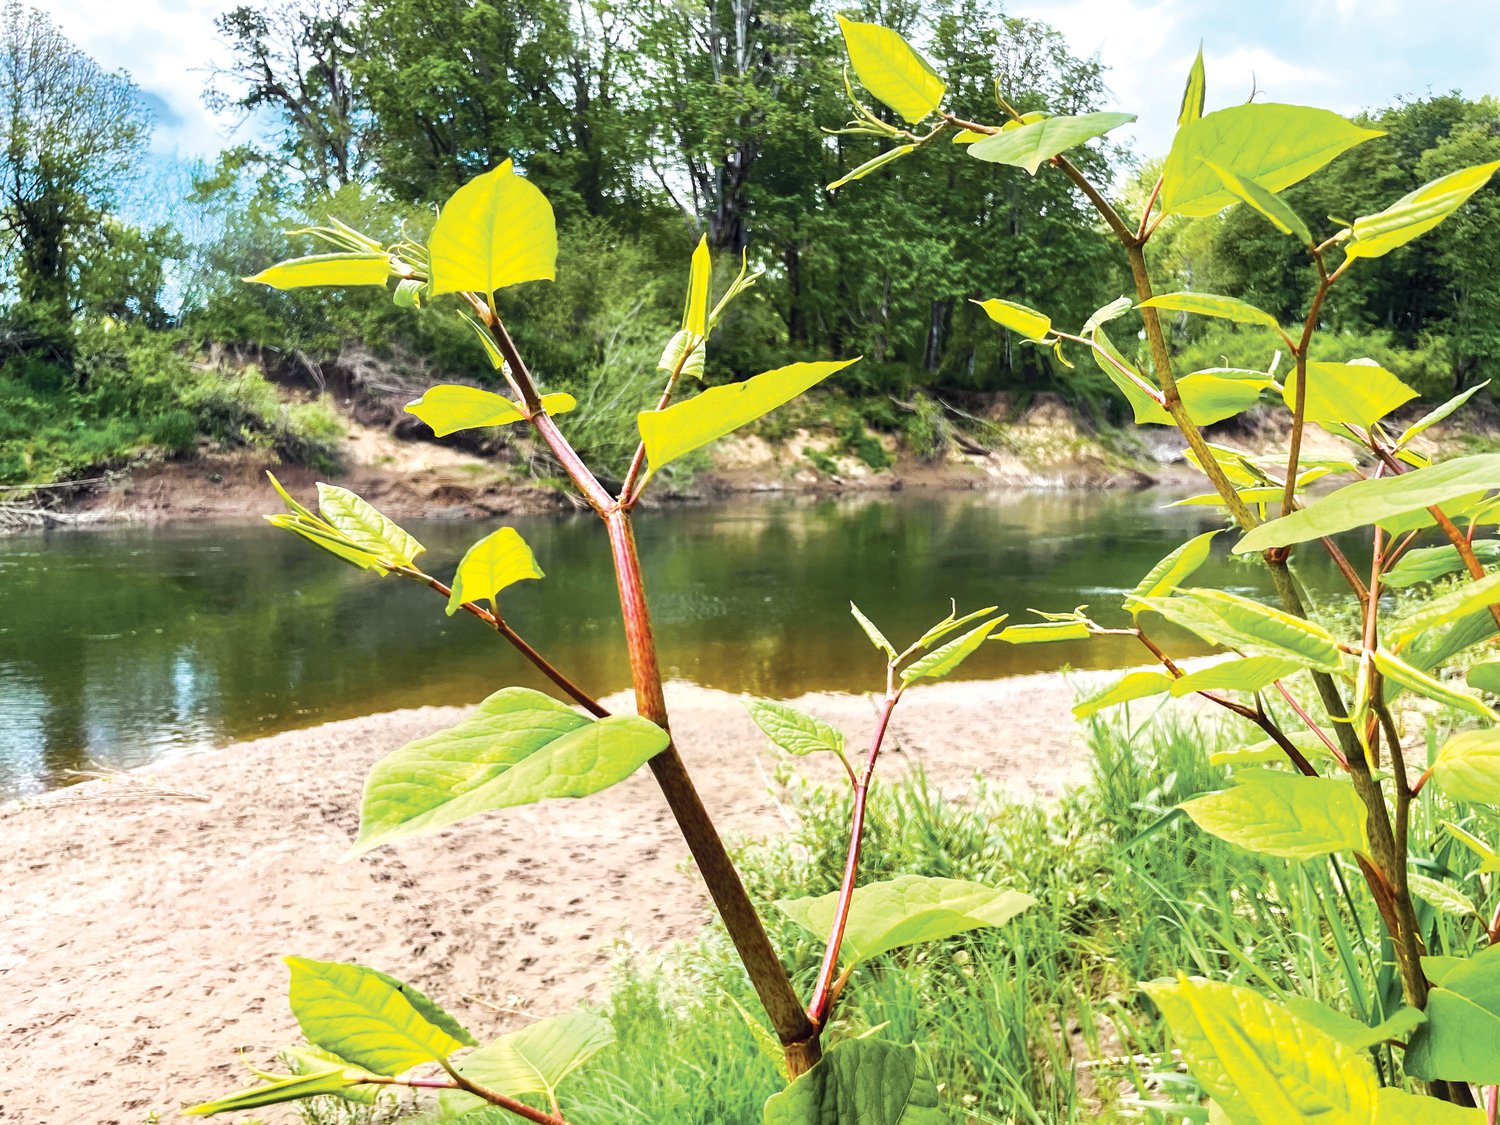 Knotweed is seen on a bank of the Chehalis River Monday in Chehalis near Northwest Florida Avenue.